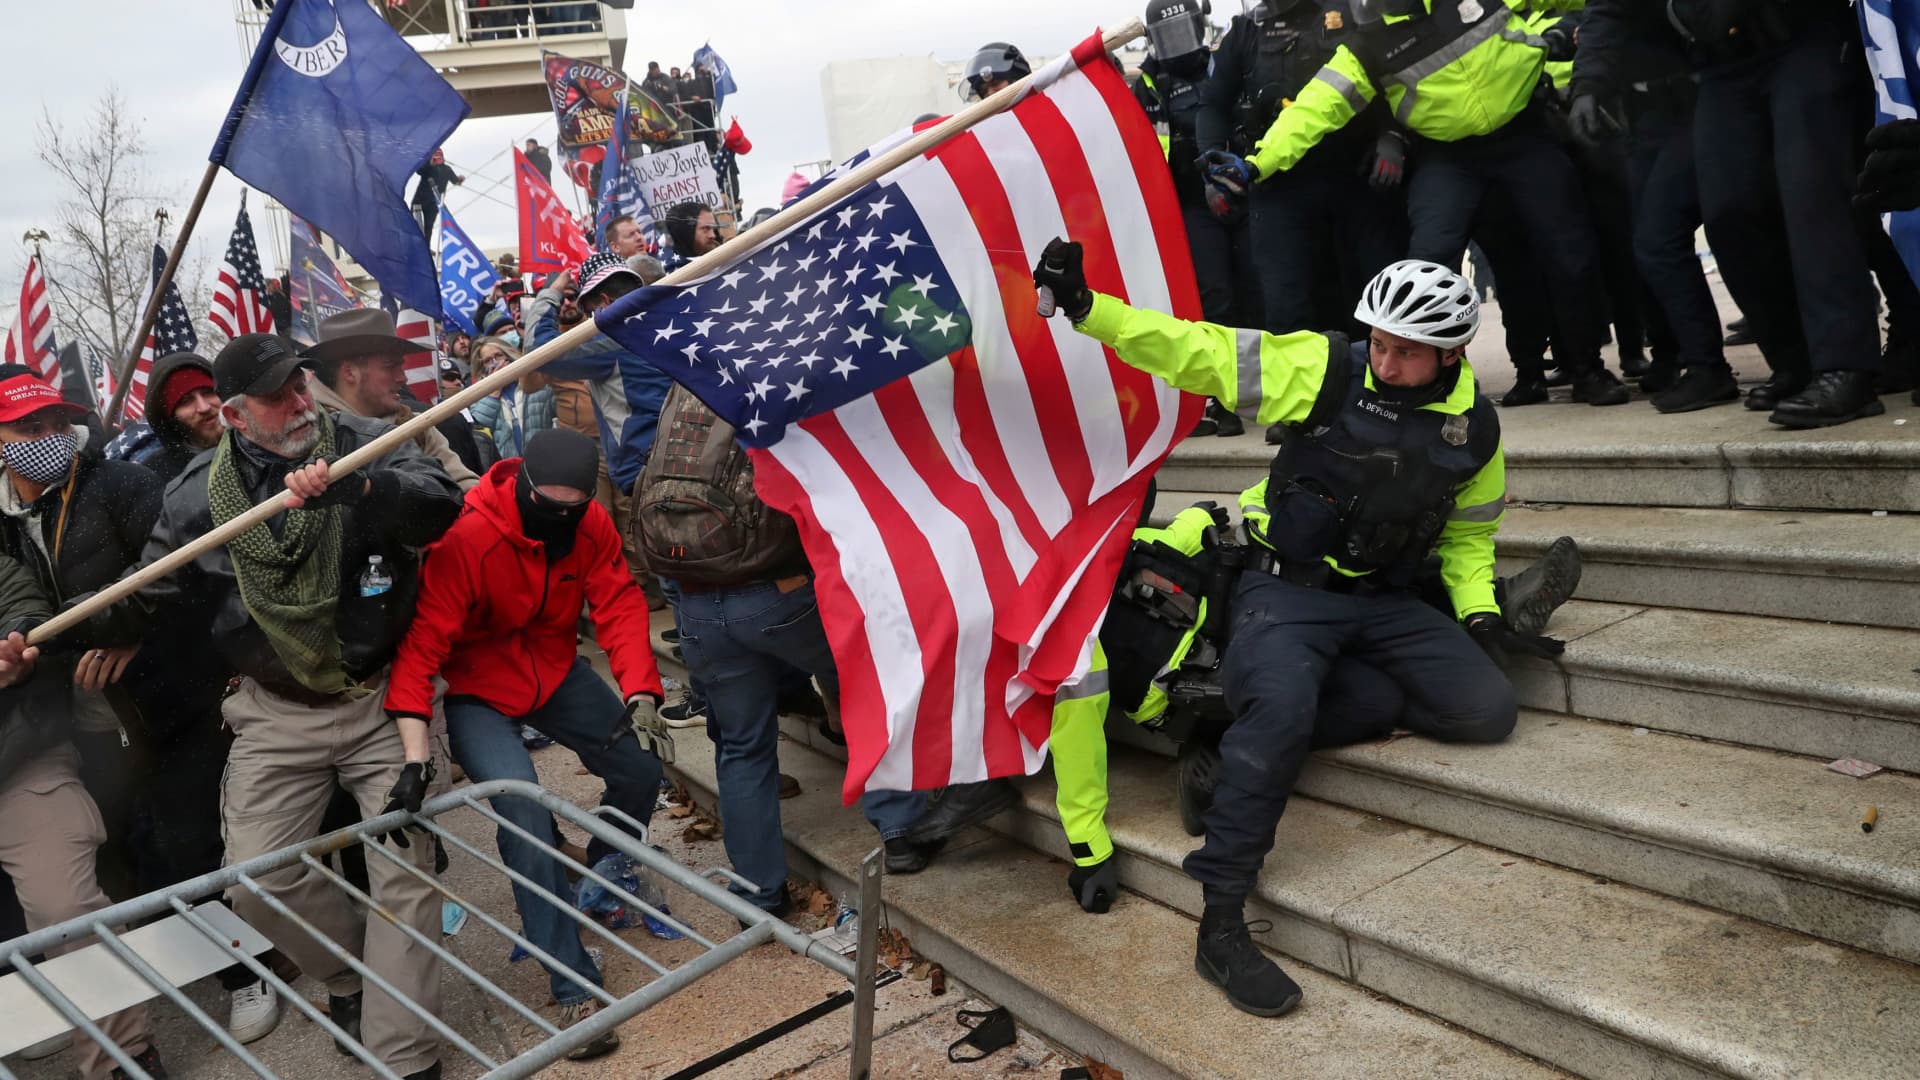 Members of U.S. Capitol Police try to fend off a mob of supporters of U.S. President Donald Trump as one of them tries to use a flag like a spear as the supporters storm the U.S. Capitol Building in Washington, January 6, 2021.